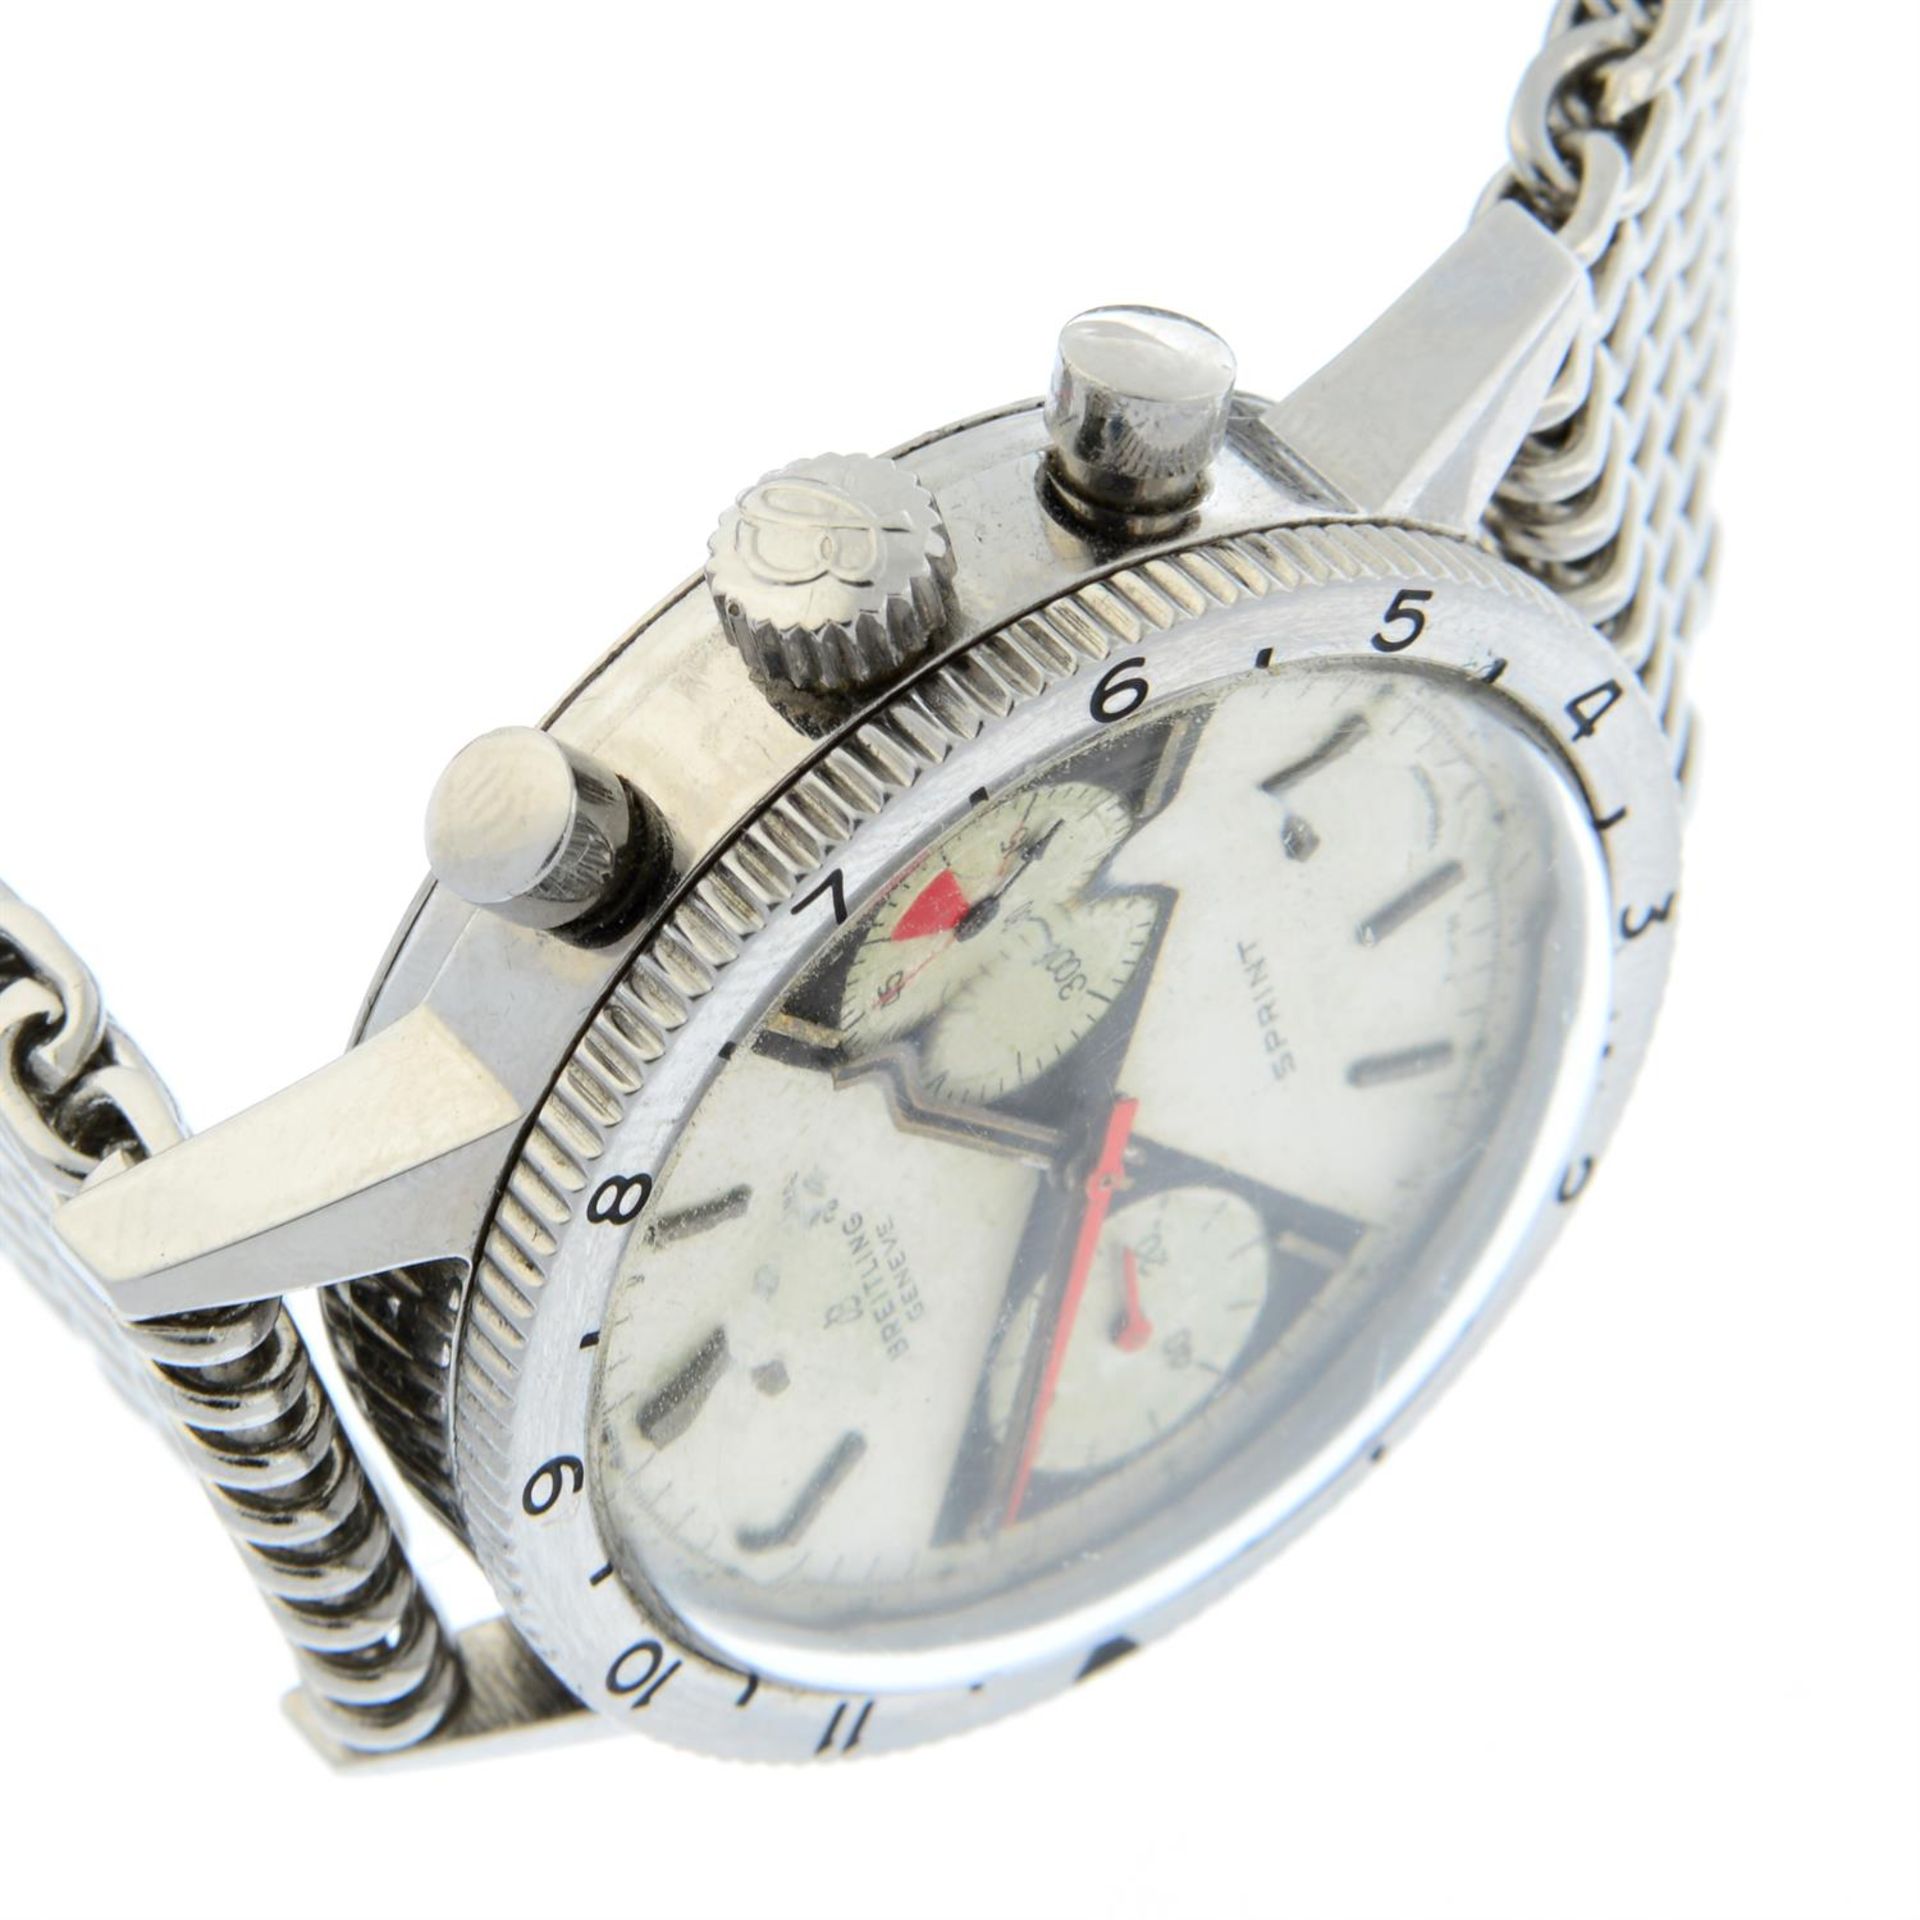 BREITLING - a stainless steel Sprint chronograph bracelet watch, 38mm. - Image 3 of 5